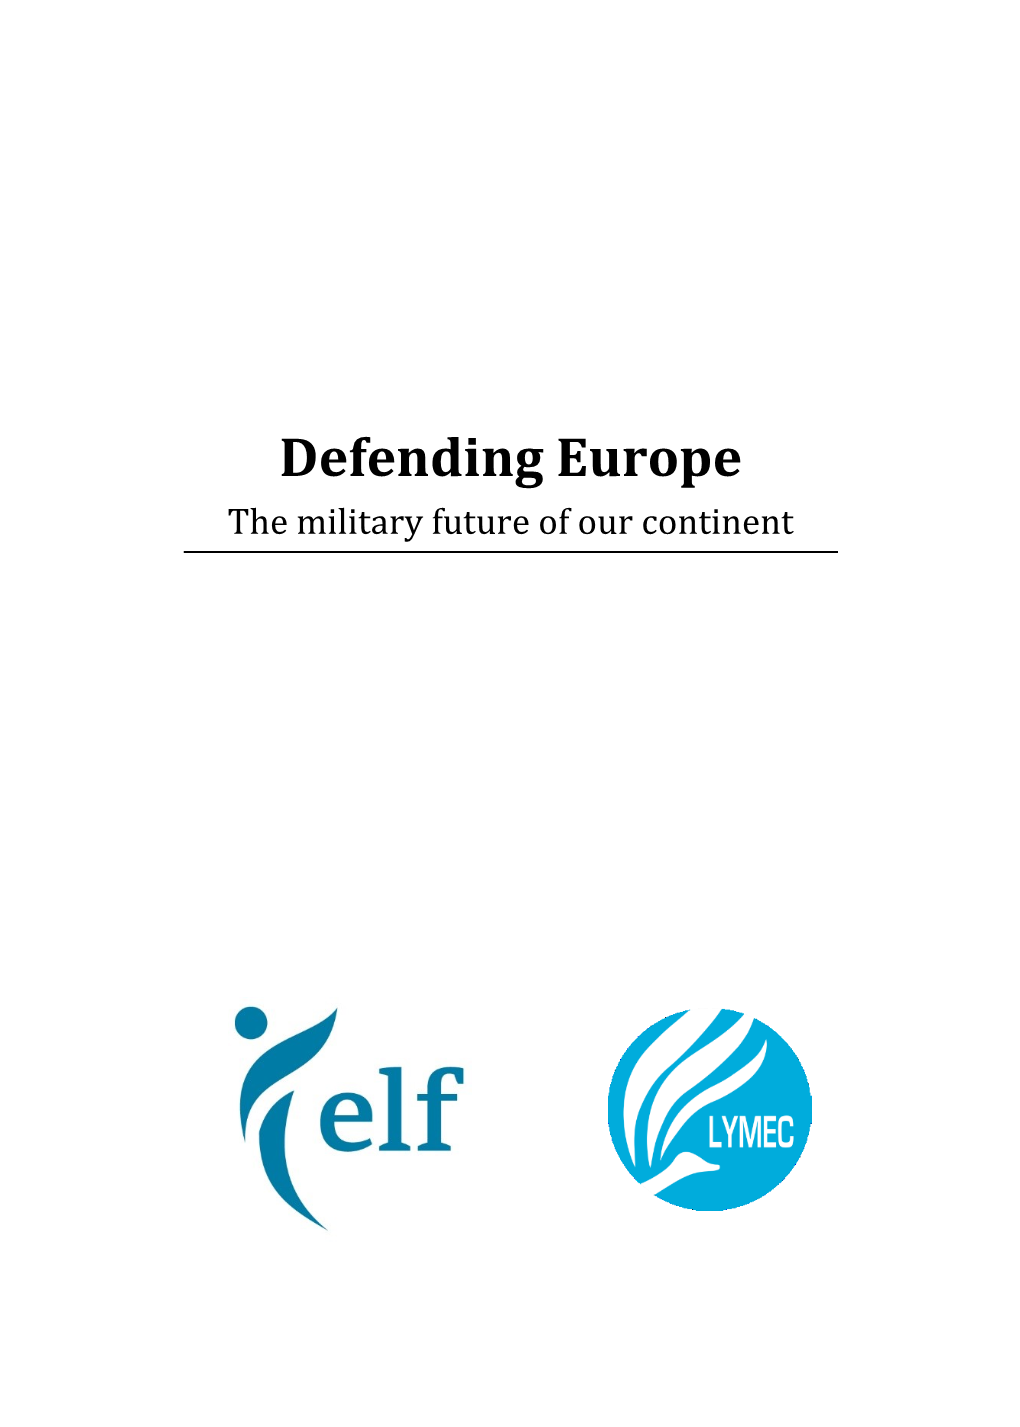 Defending Europe the Military Future of Our Continent